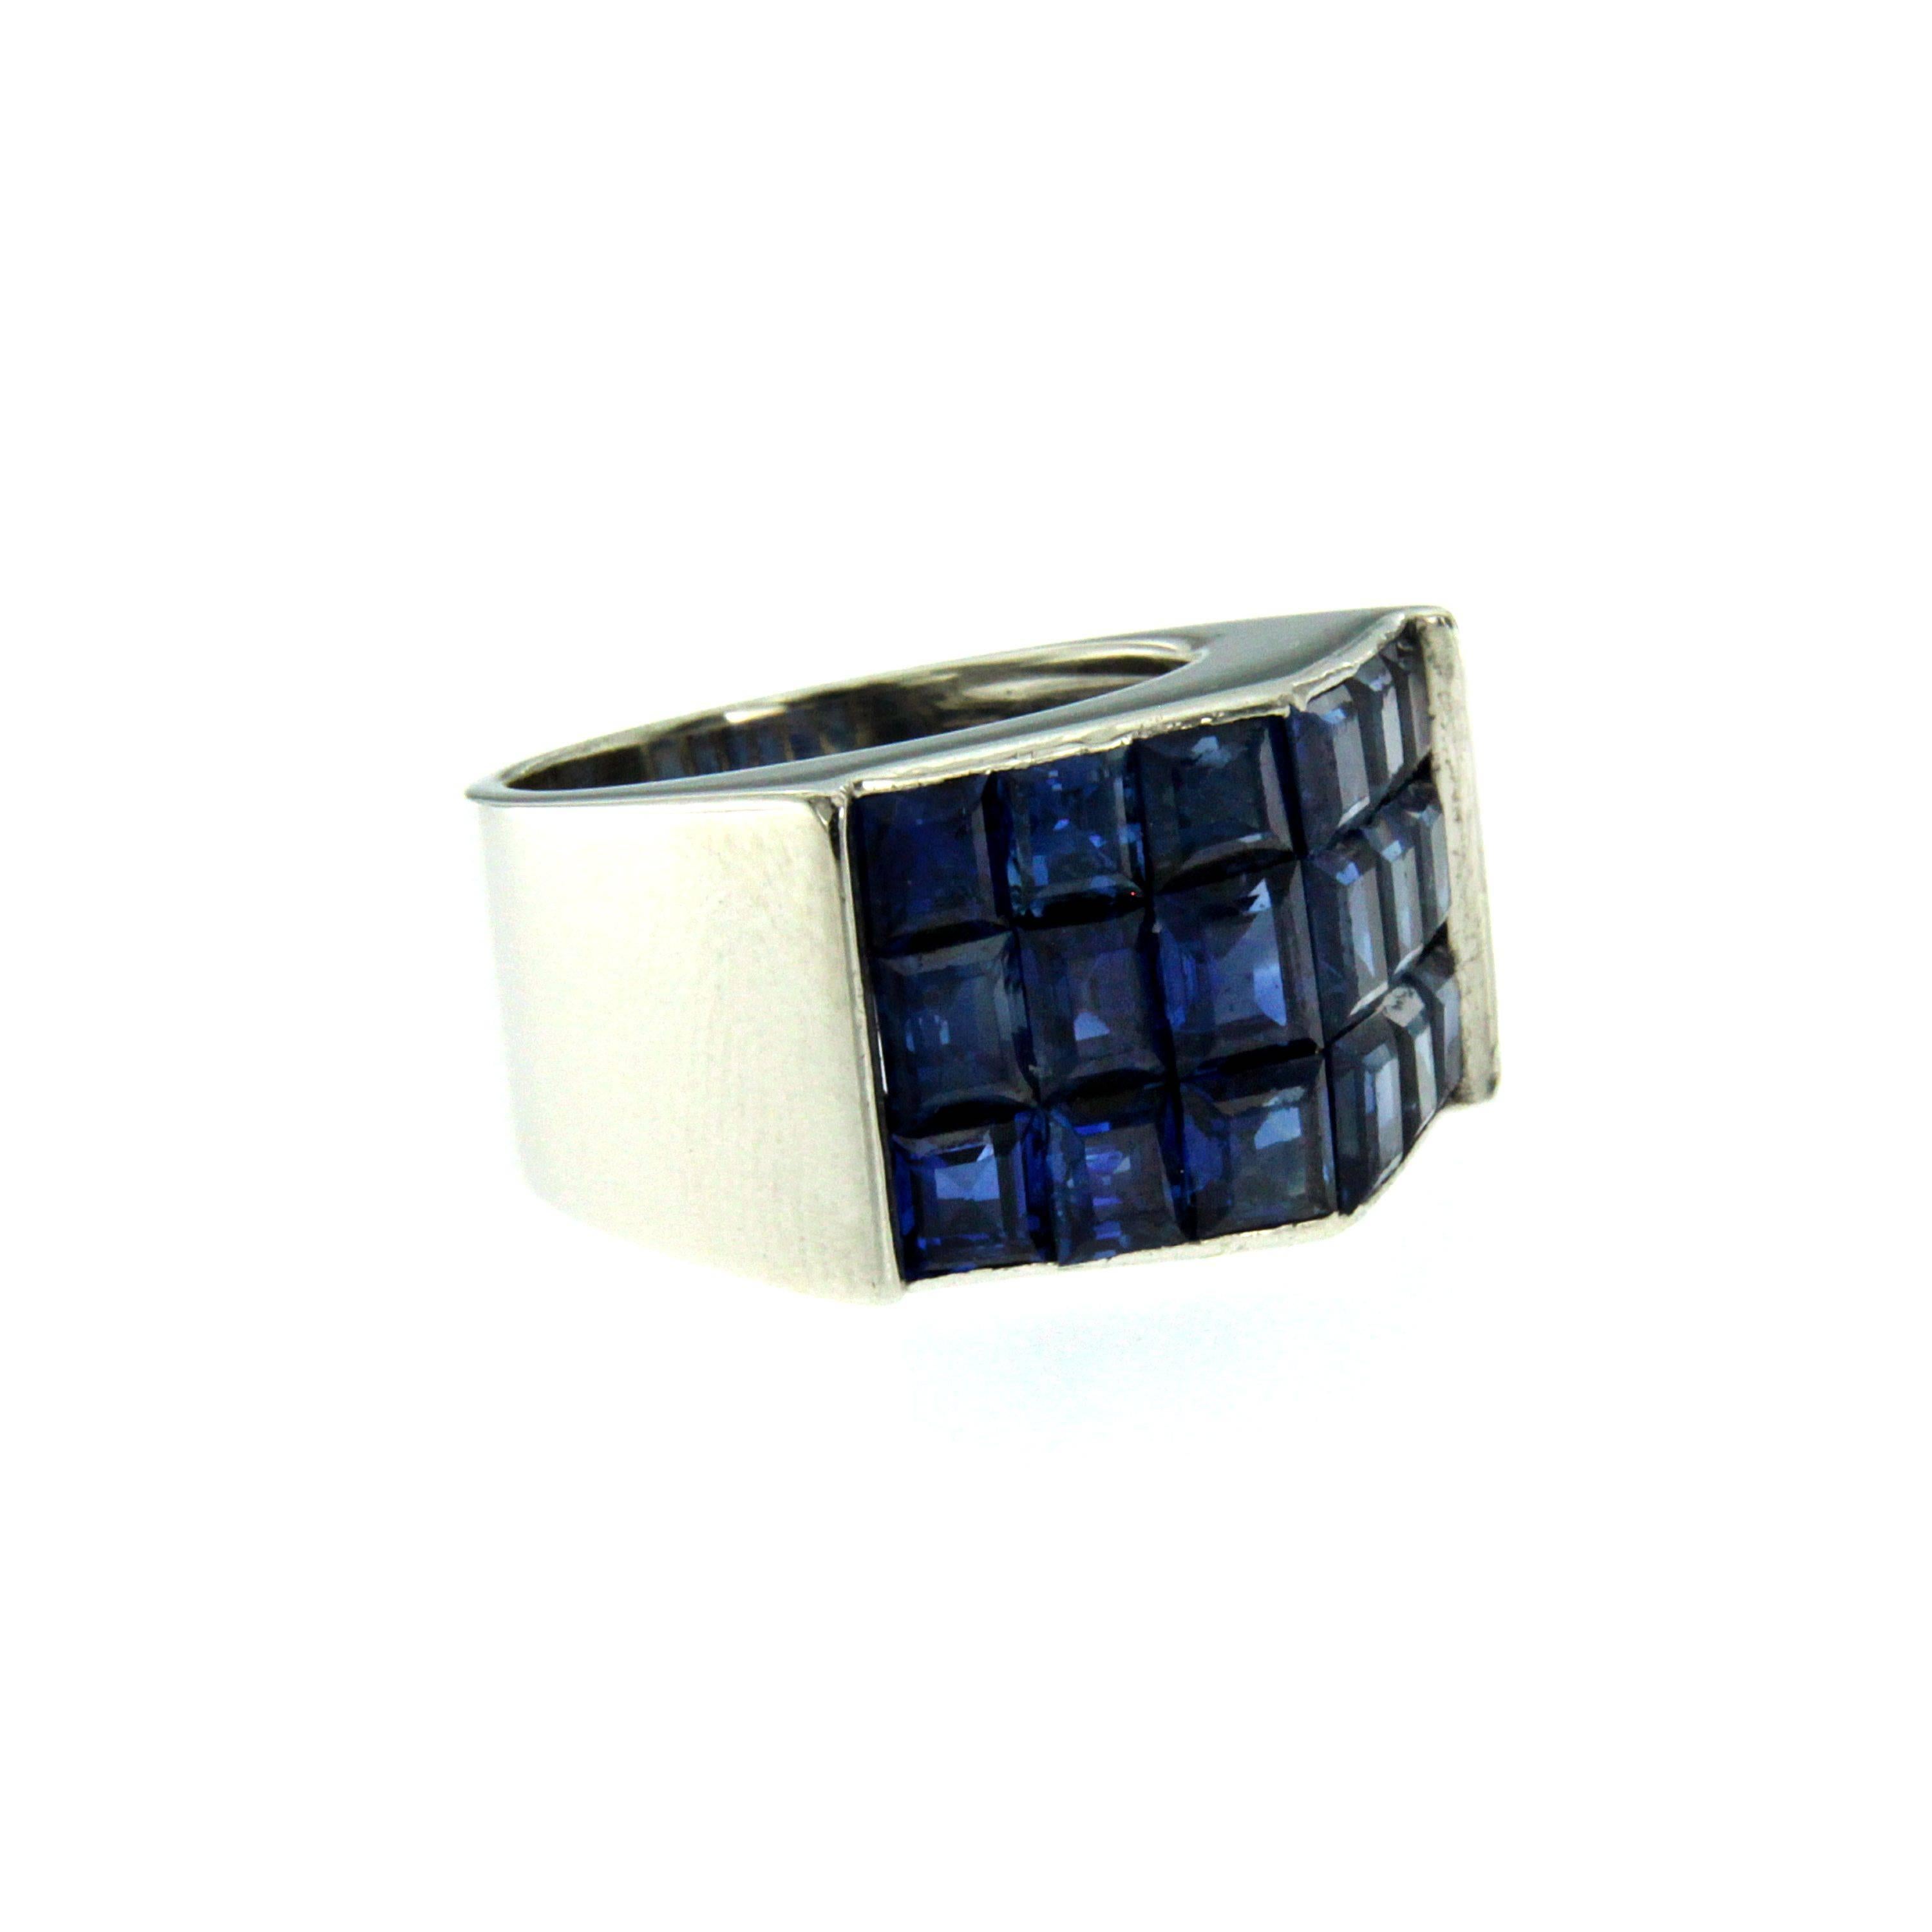 Vintage Van Cleef & Arpels Sapphire band ring set in 18k white gold.
The top of this ring is covered with 8.00 carats of natural strong color burmese sapphire all square cut. Circa 1980s

CONDITION: Pre-owned - Excellent 
METAL: 18k White Gold
GEM